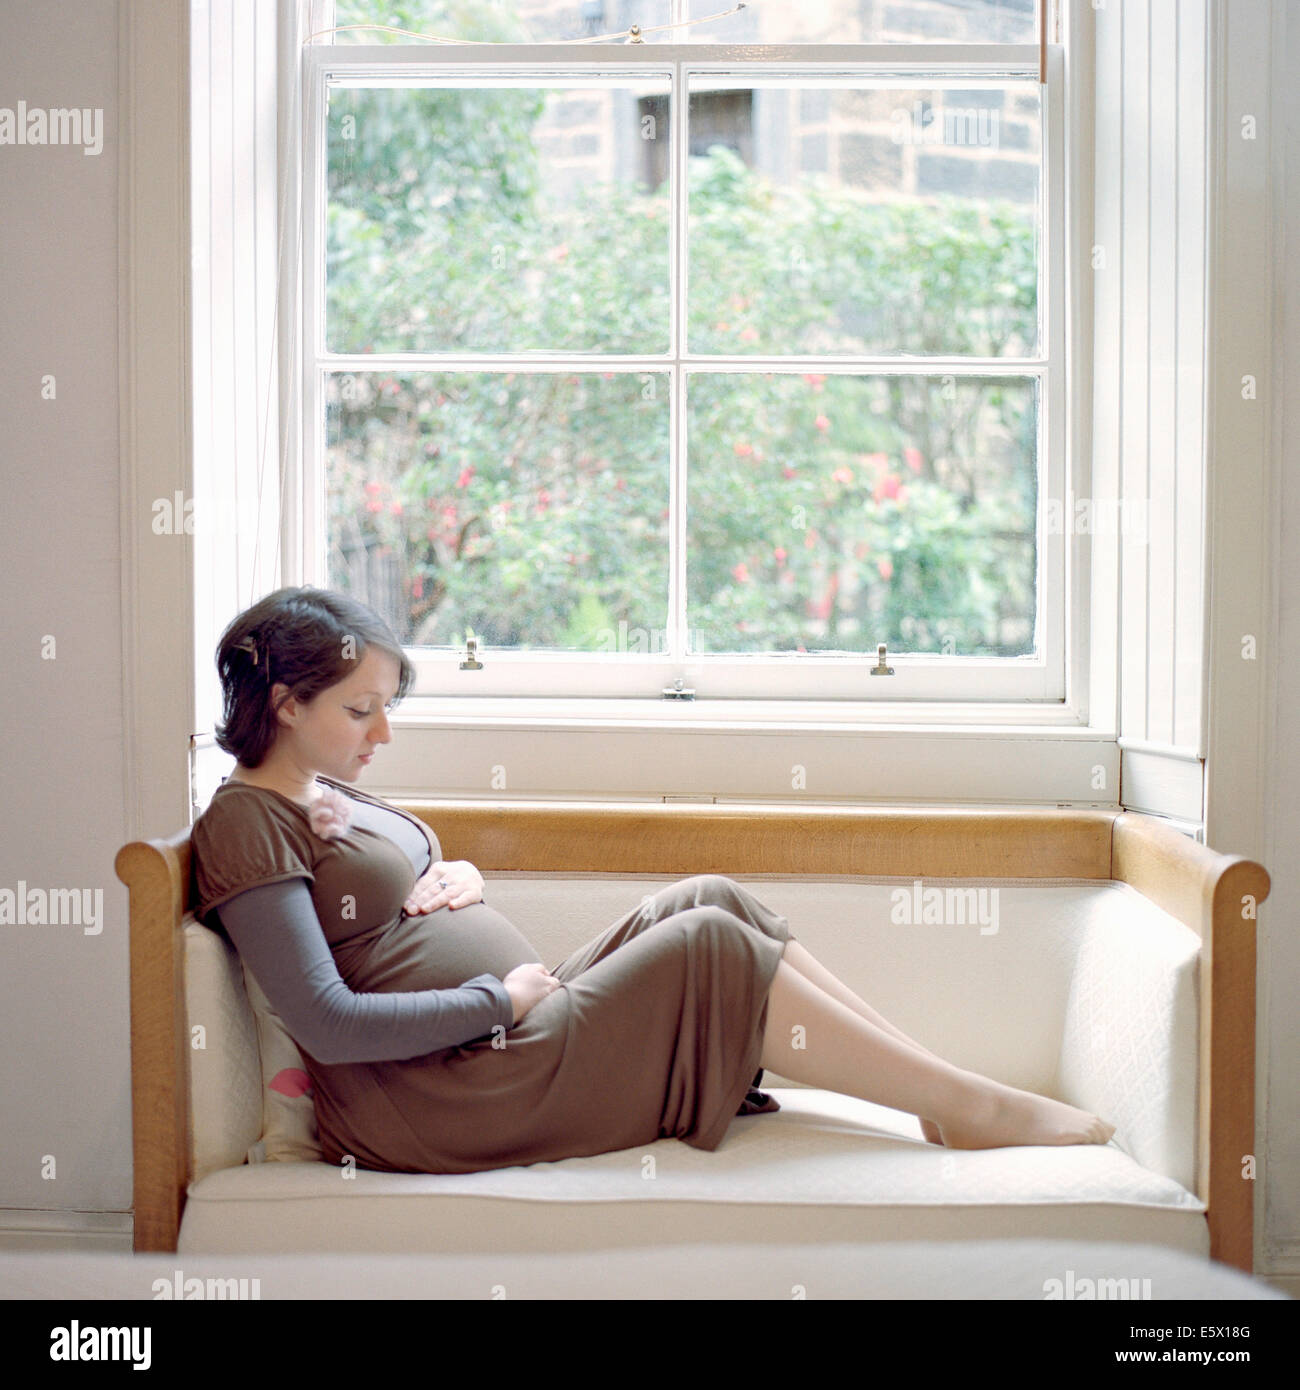 Portrait of mid adult pregnant woman sitting on window seat holding stomach Stock Photo